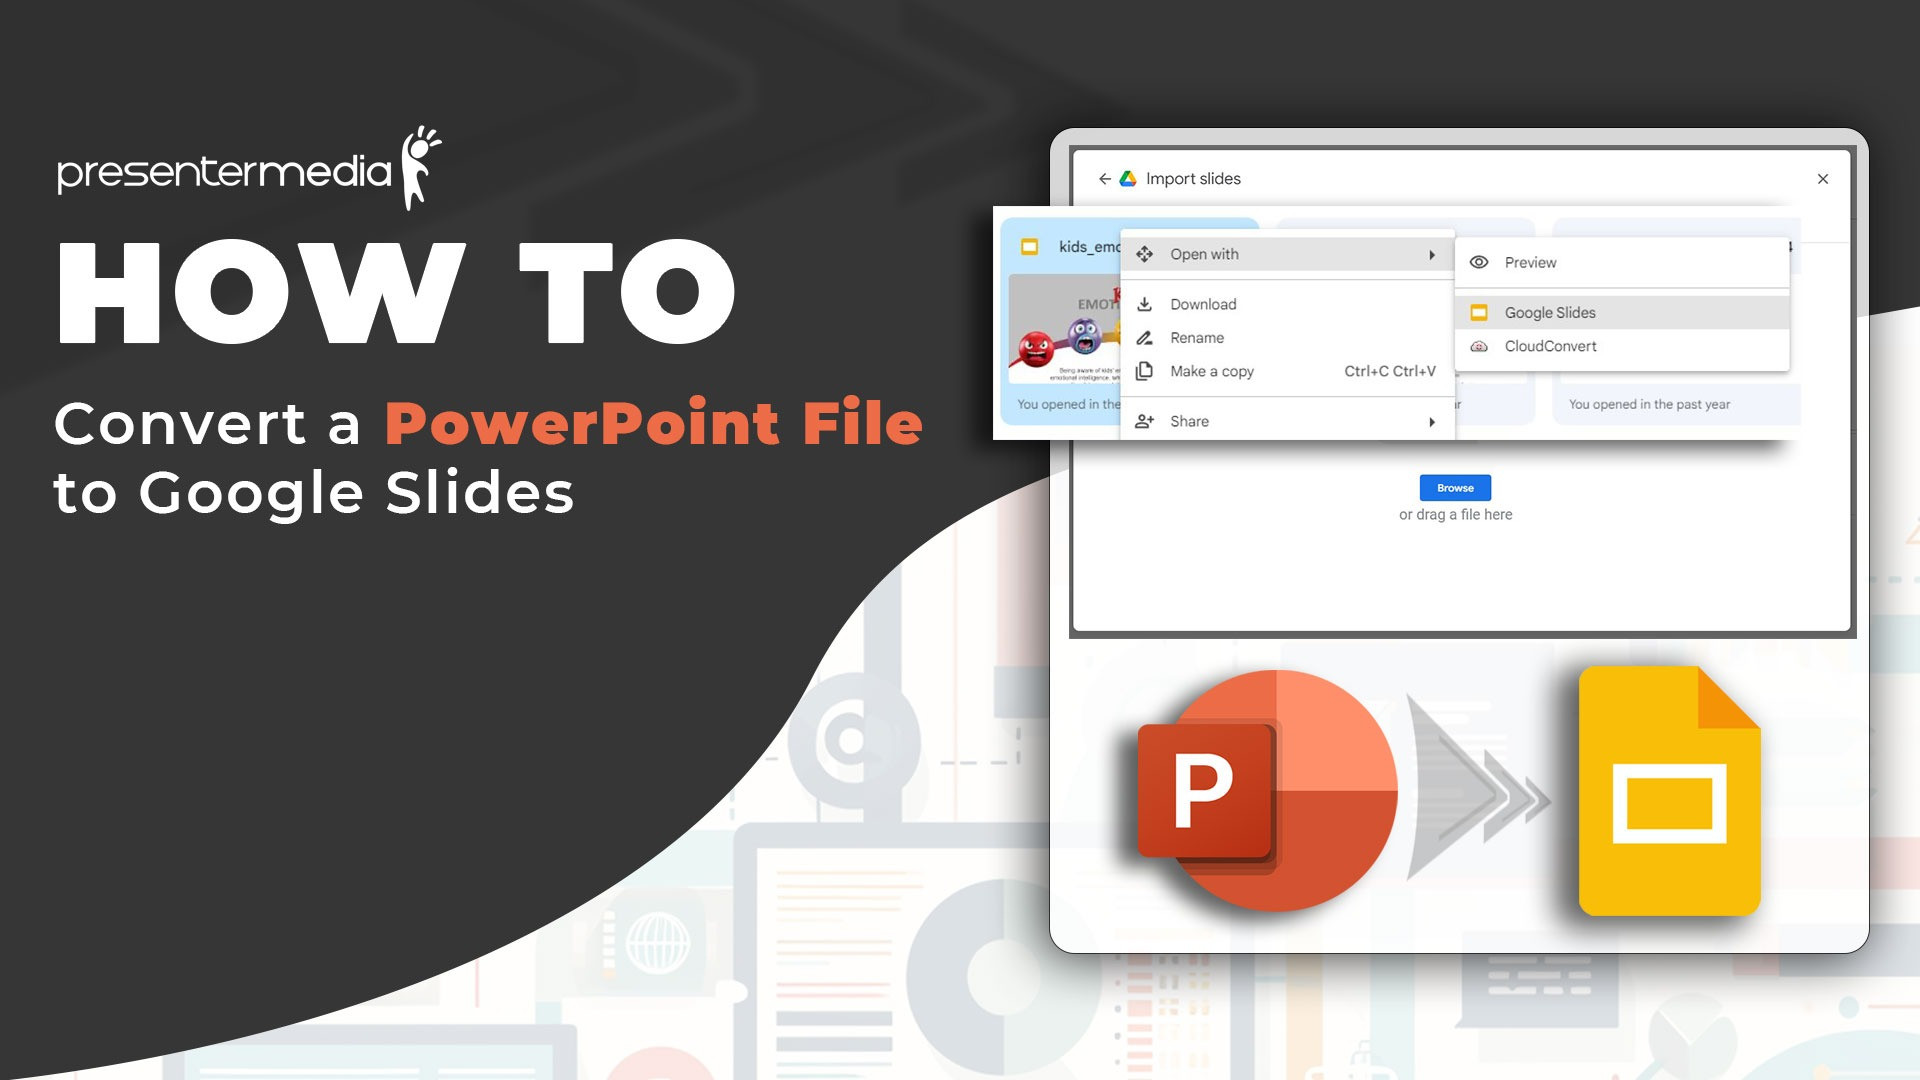 free animated powerpoint presentations